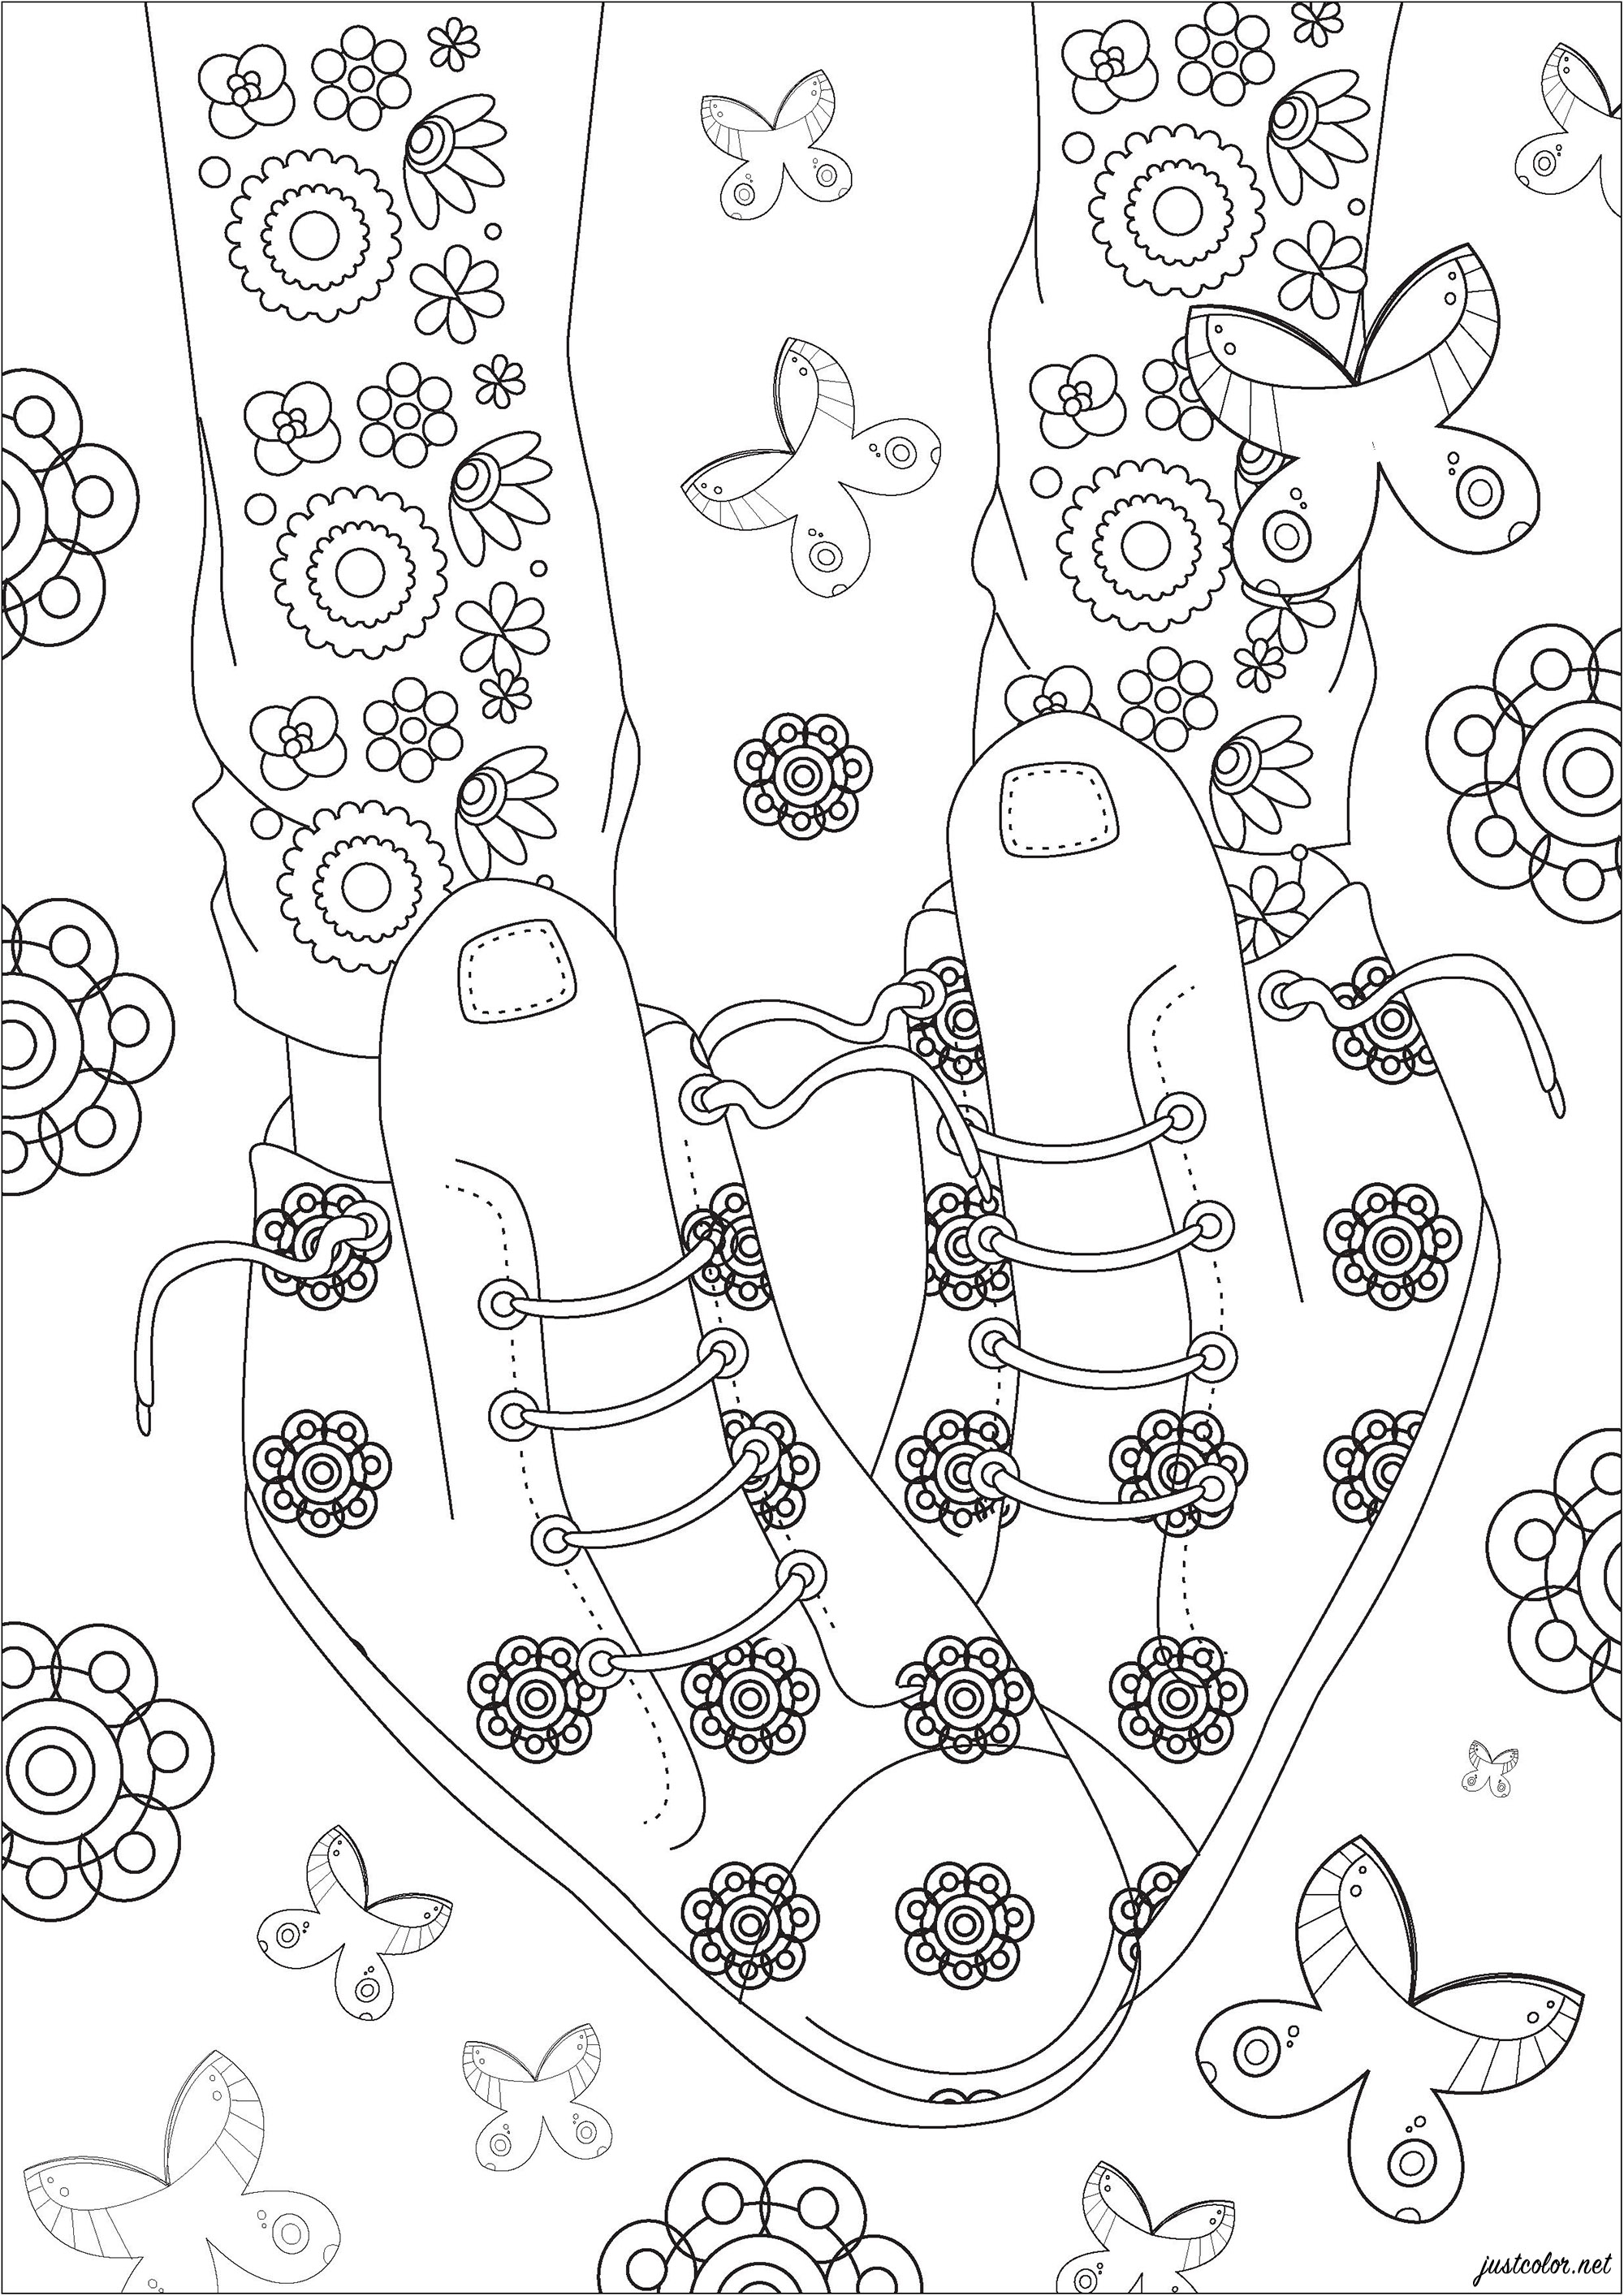 Shoes and laces, with flower and butterfly motifs. In this coloring page, we see a pair of shoes with pretty floral motifs.Many butterflies are flying around them.